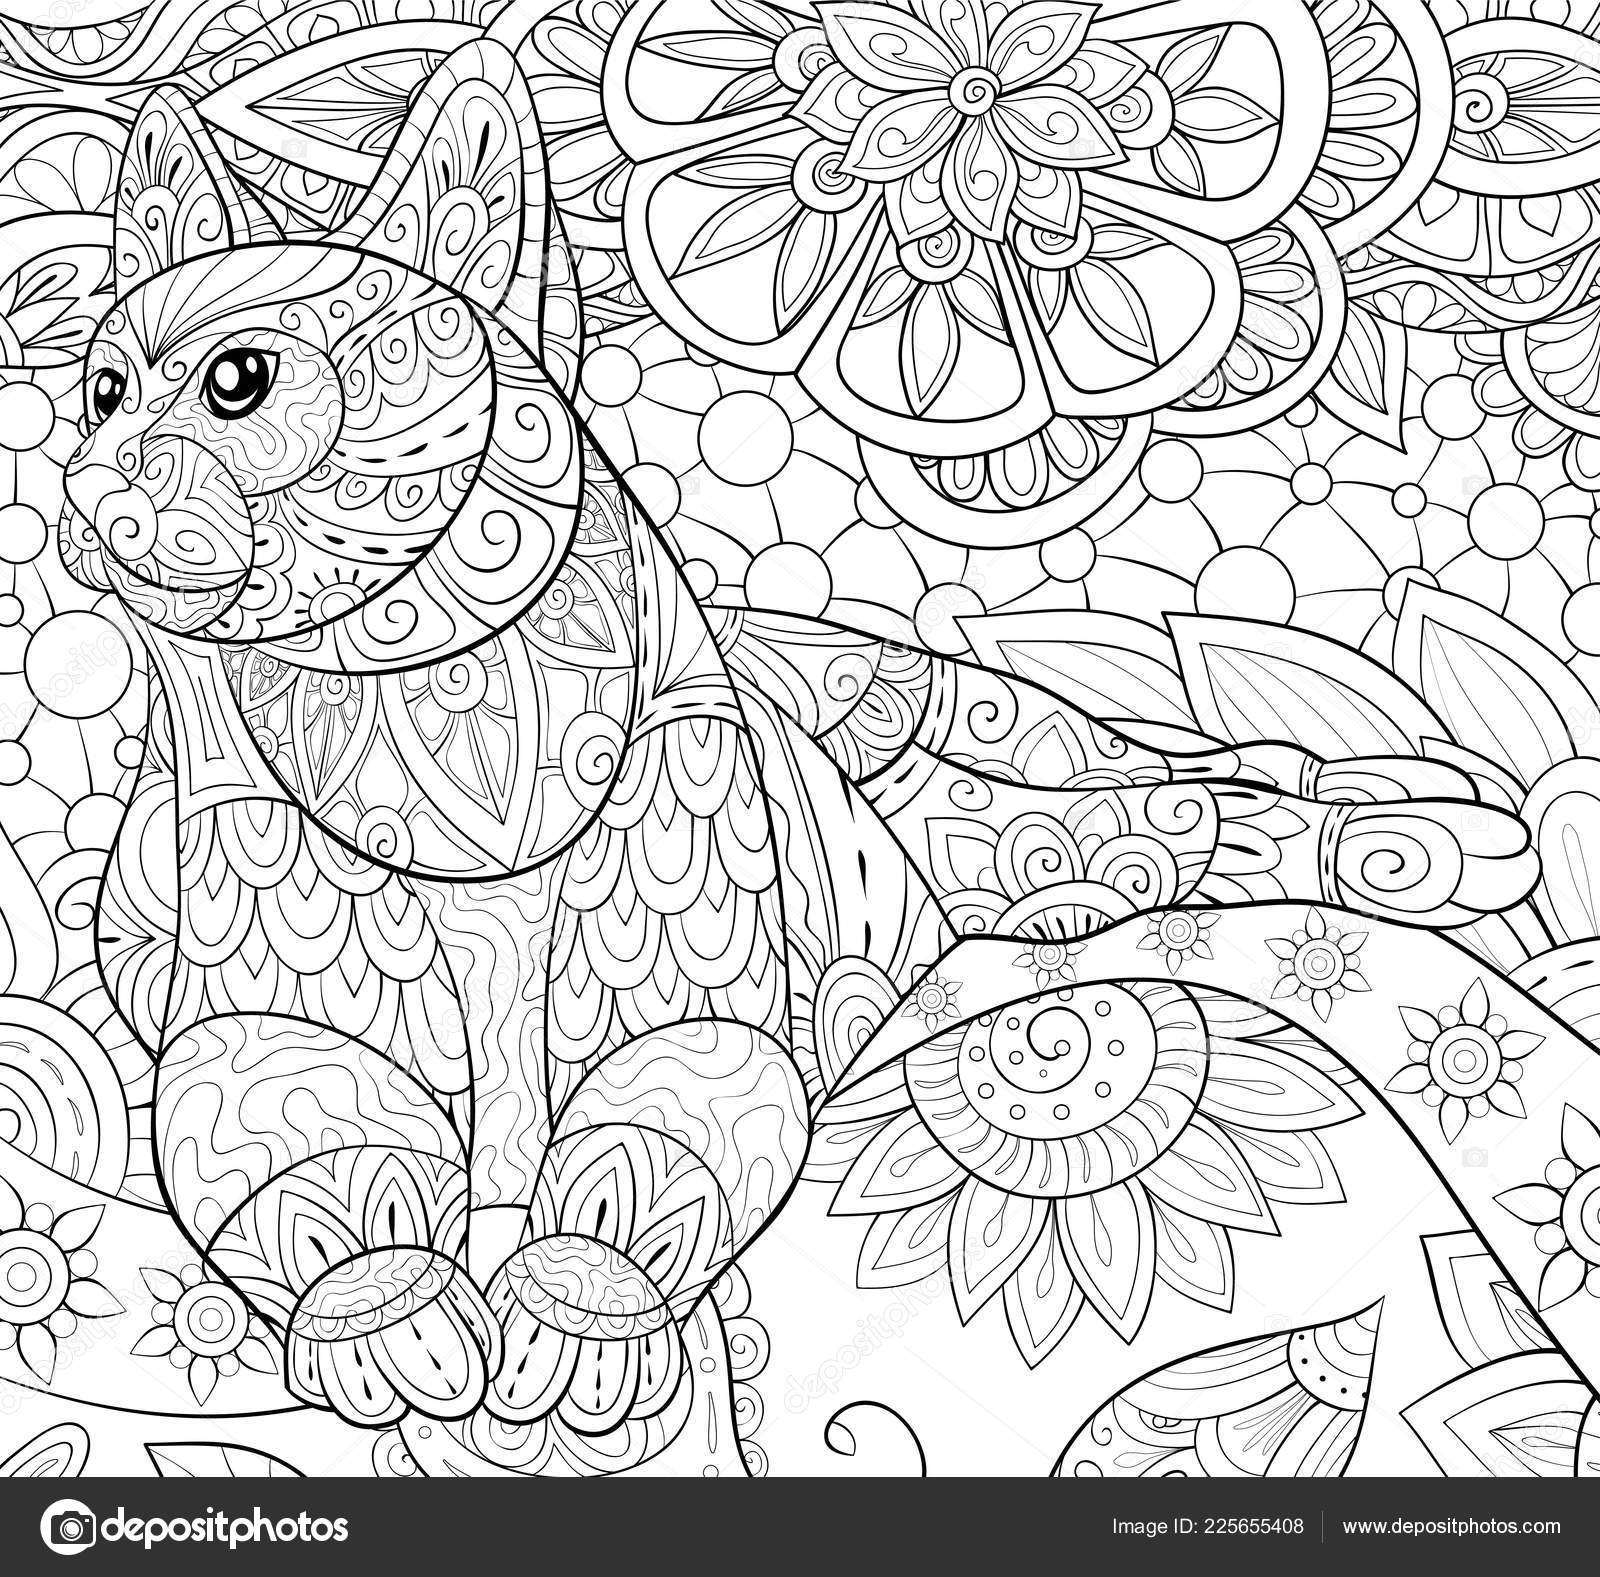 Adult Coloring Book Page Cute Panther Image Relaxing Zen Art Stock Vector  by ©nonuzza 225656240